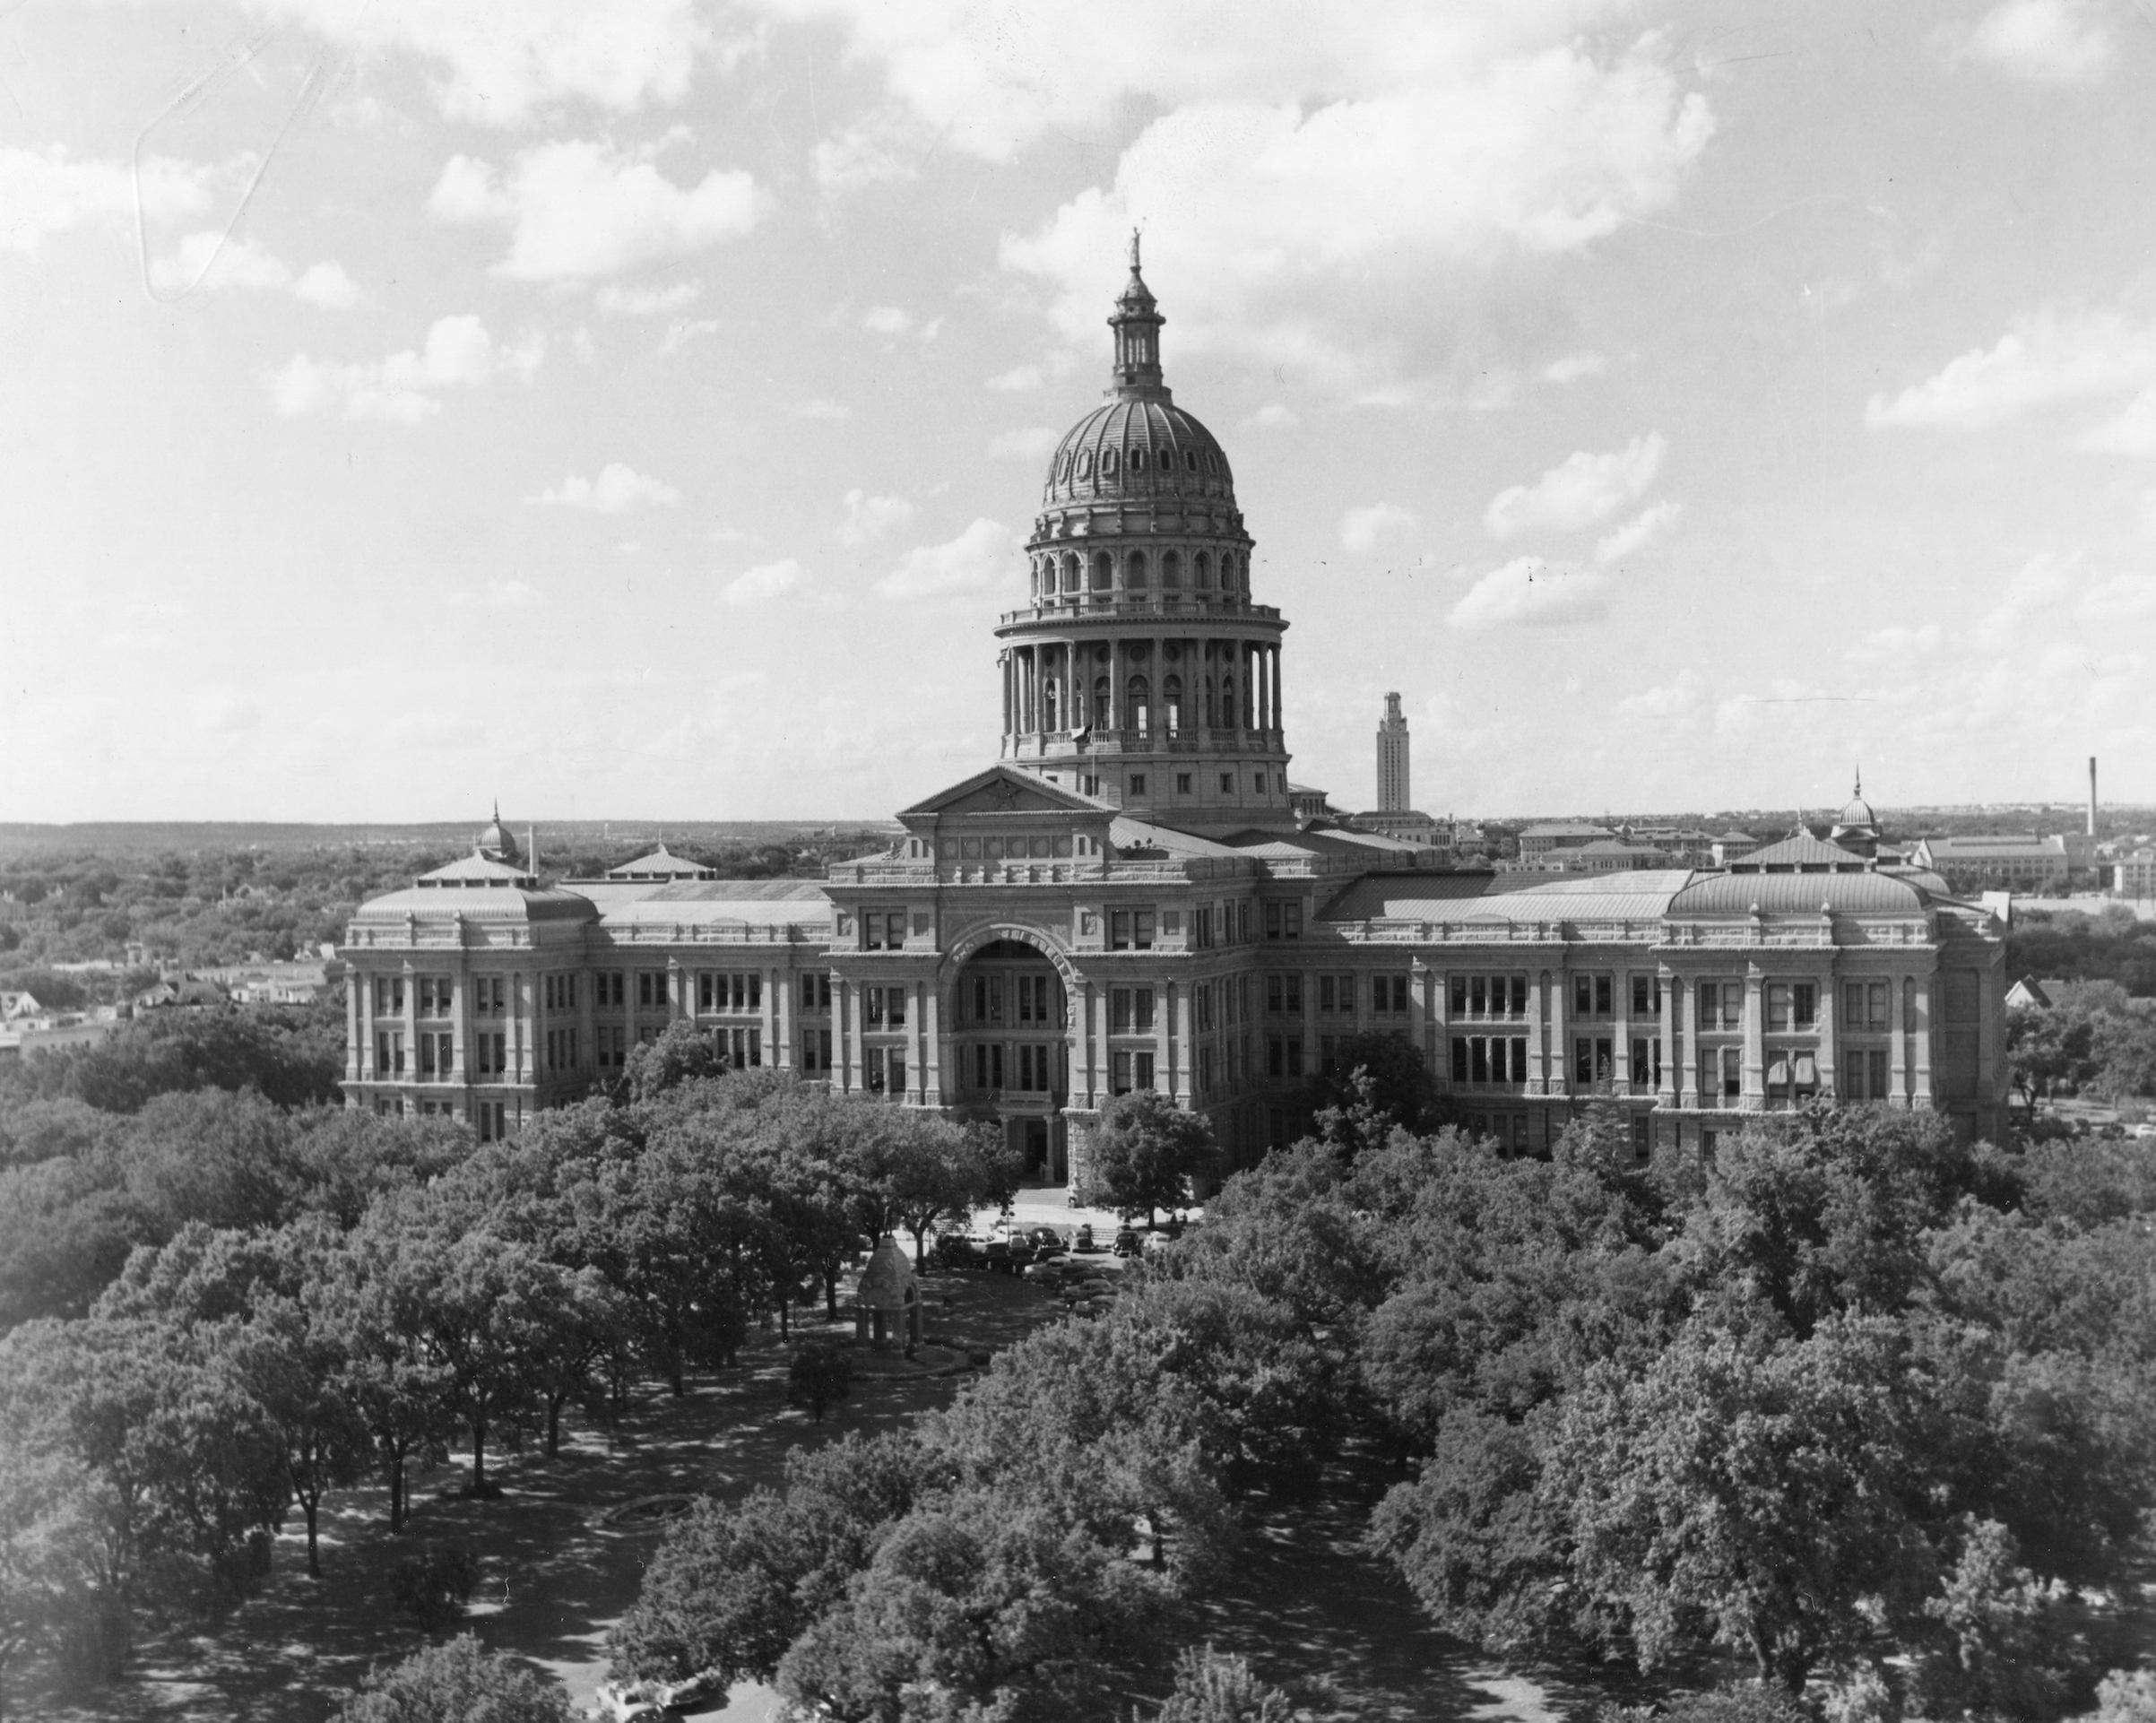 View of the State Capitol Building (completed 1888), Austin, Texas, 1960. (PhotoQuest/Getty Images)